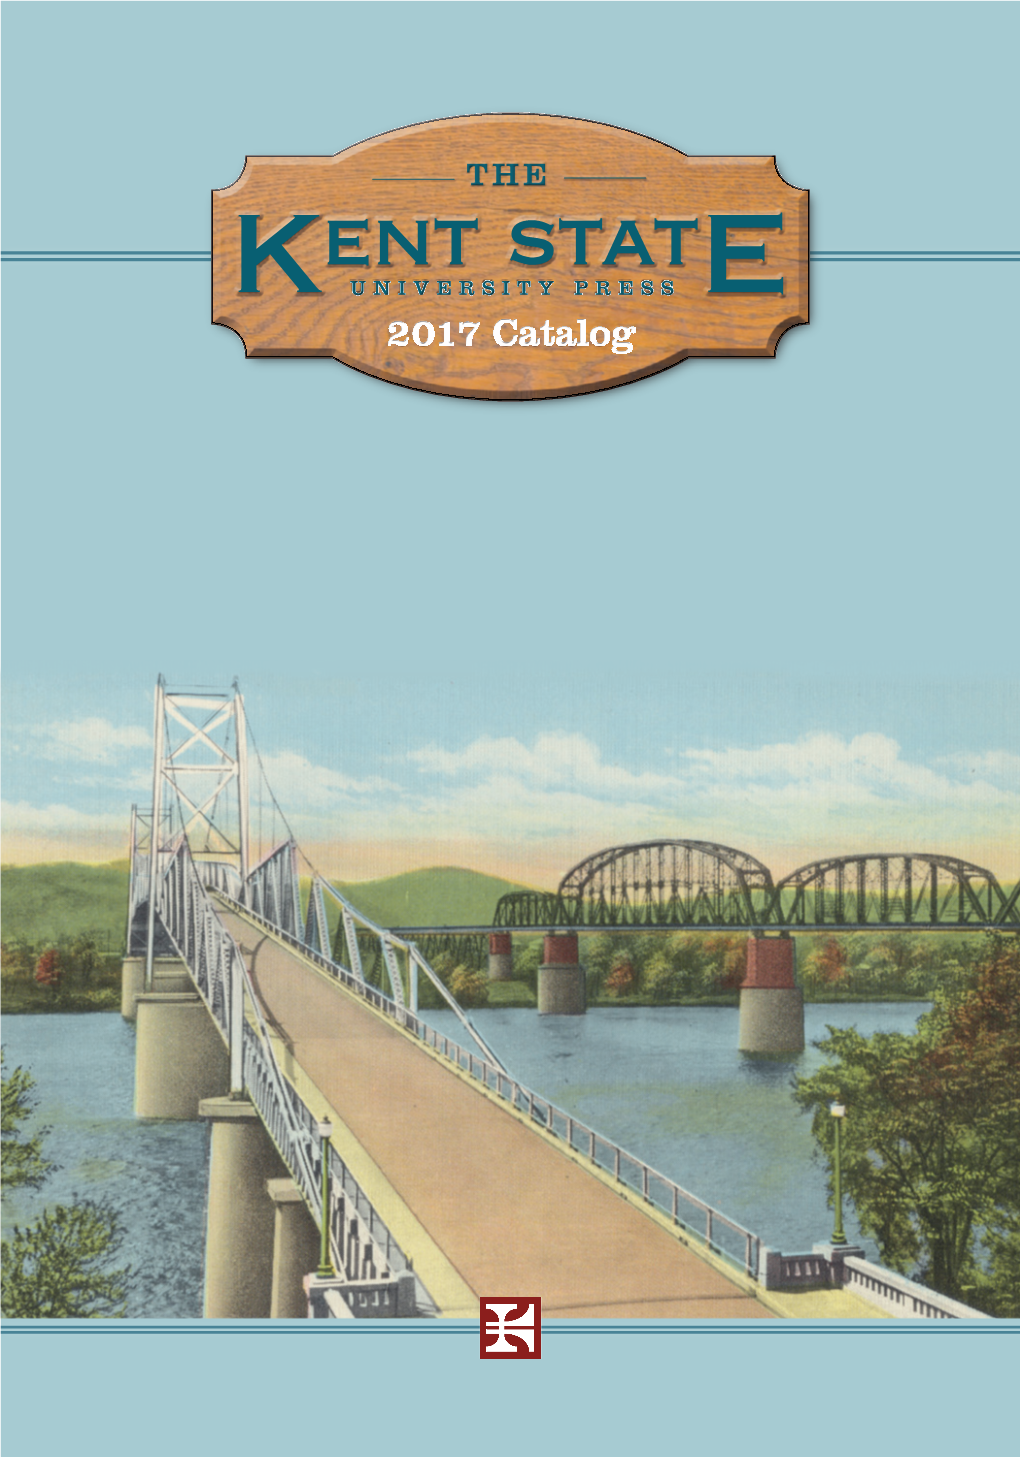 Kent State University Press Books Are Printed on Acid-Free Paper for Archival Longevity, and Most Use Paper Made from 60% Recycled Pulp, with 10% Postconsumer Waste